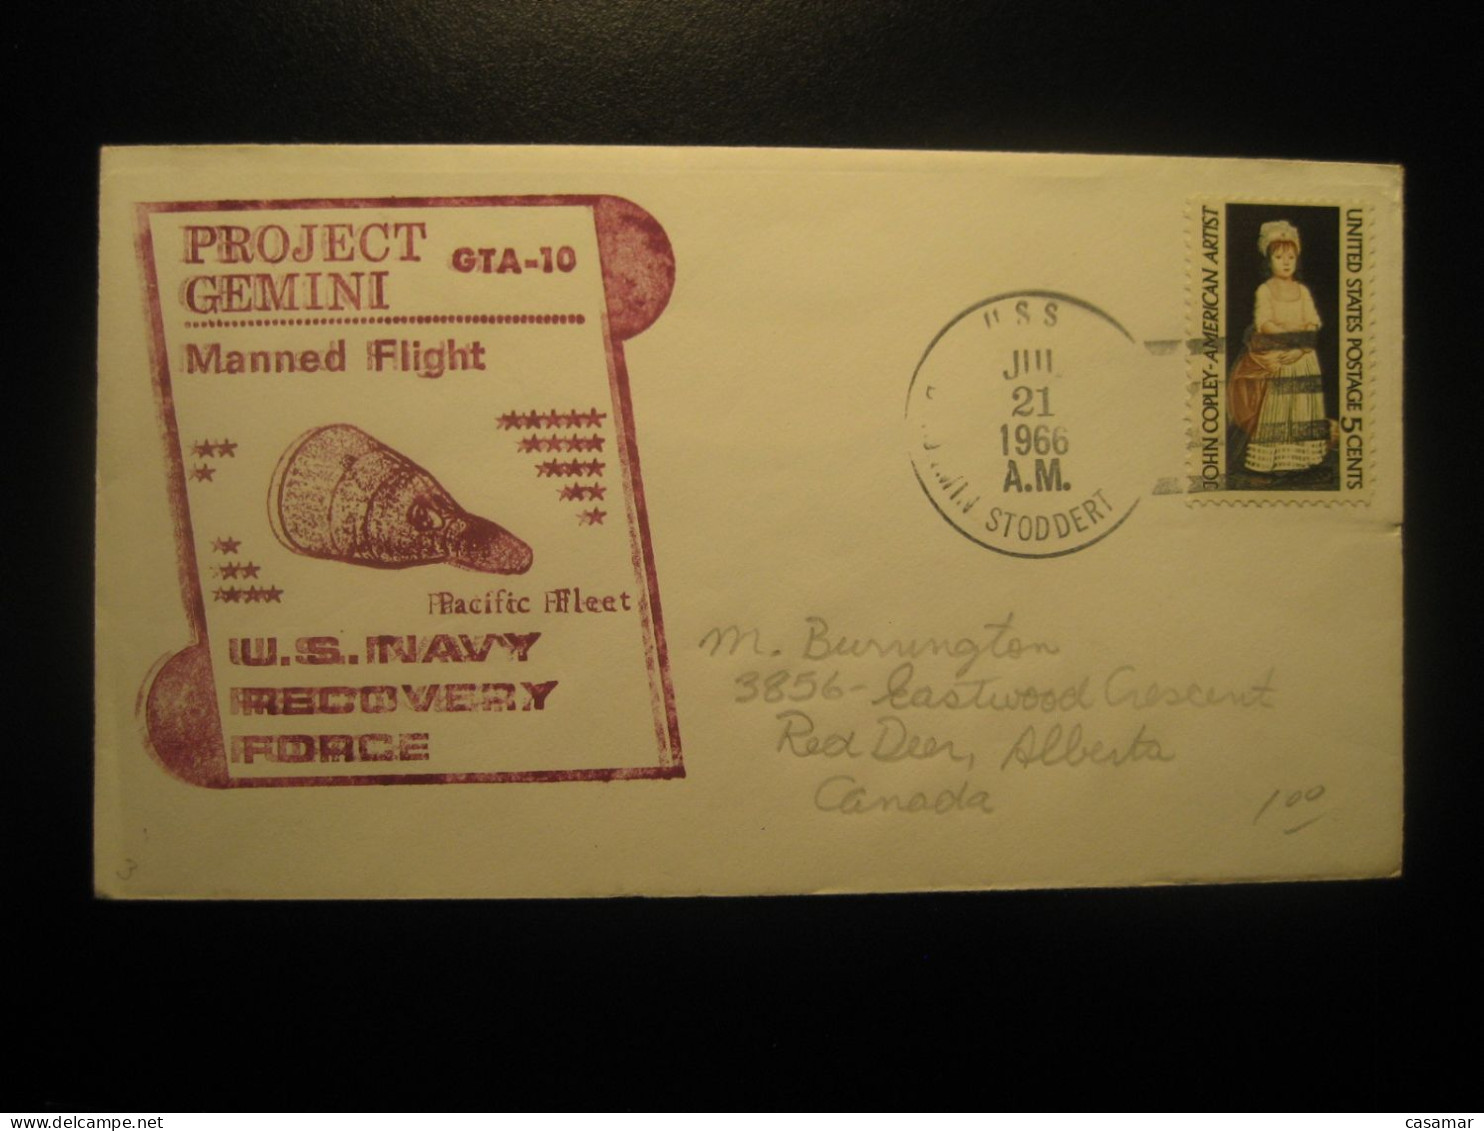 PROJECT GEMINI Pacific Fleet GTA10 Manned Flight US Navy Recovery Force USS STODDERT 1966 Cancel Cover USA Space Spatial - United States